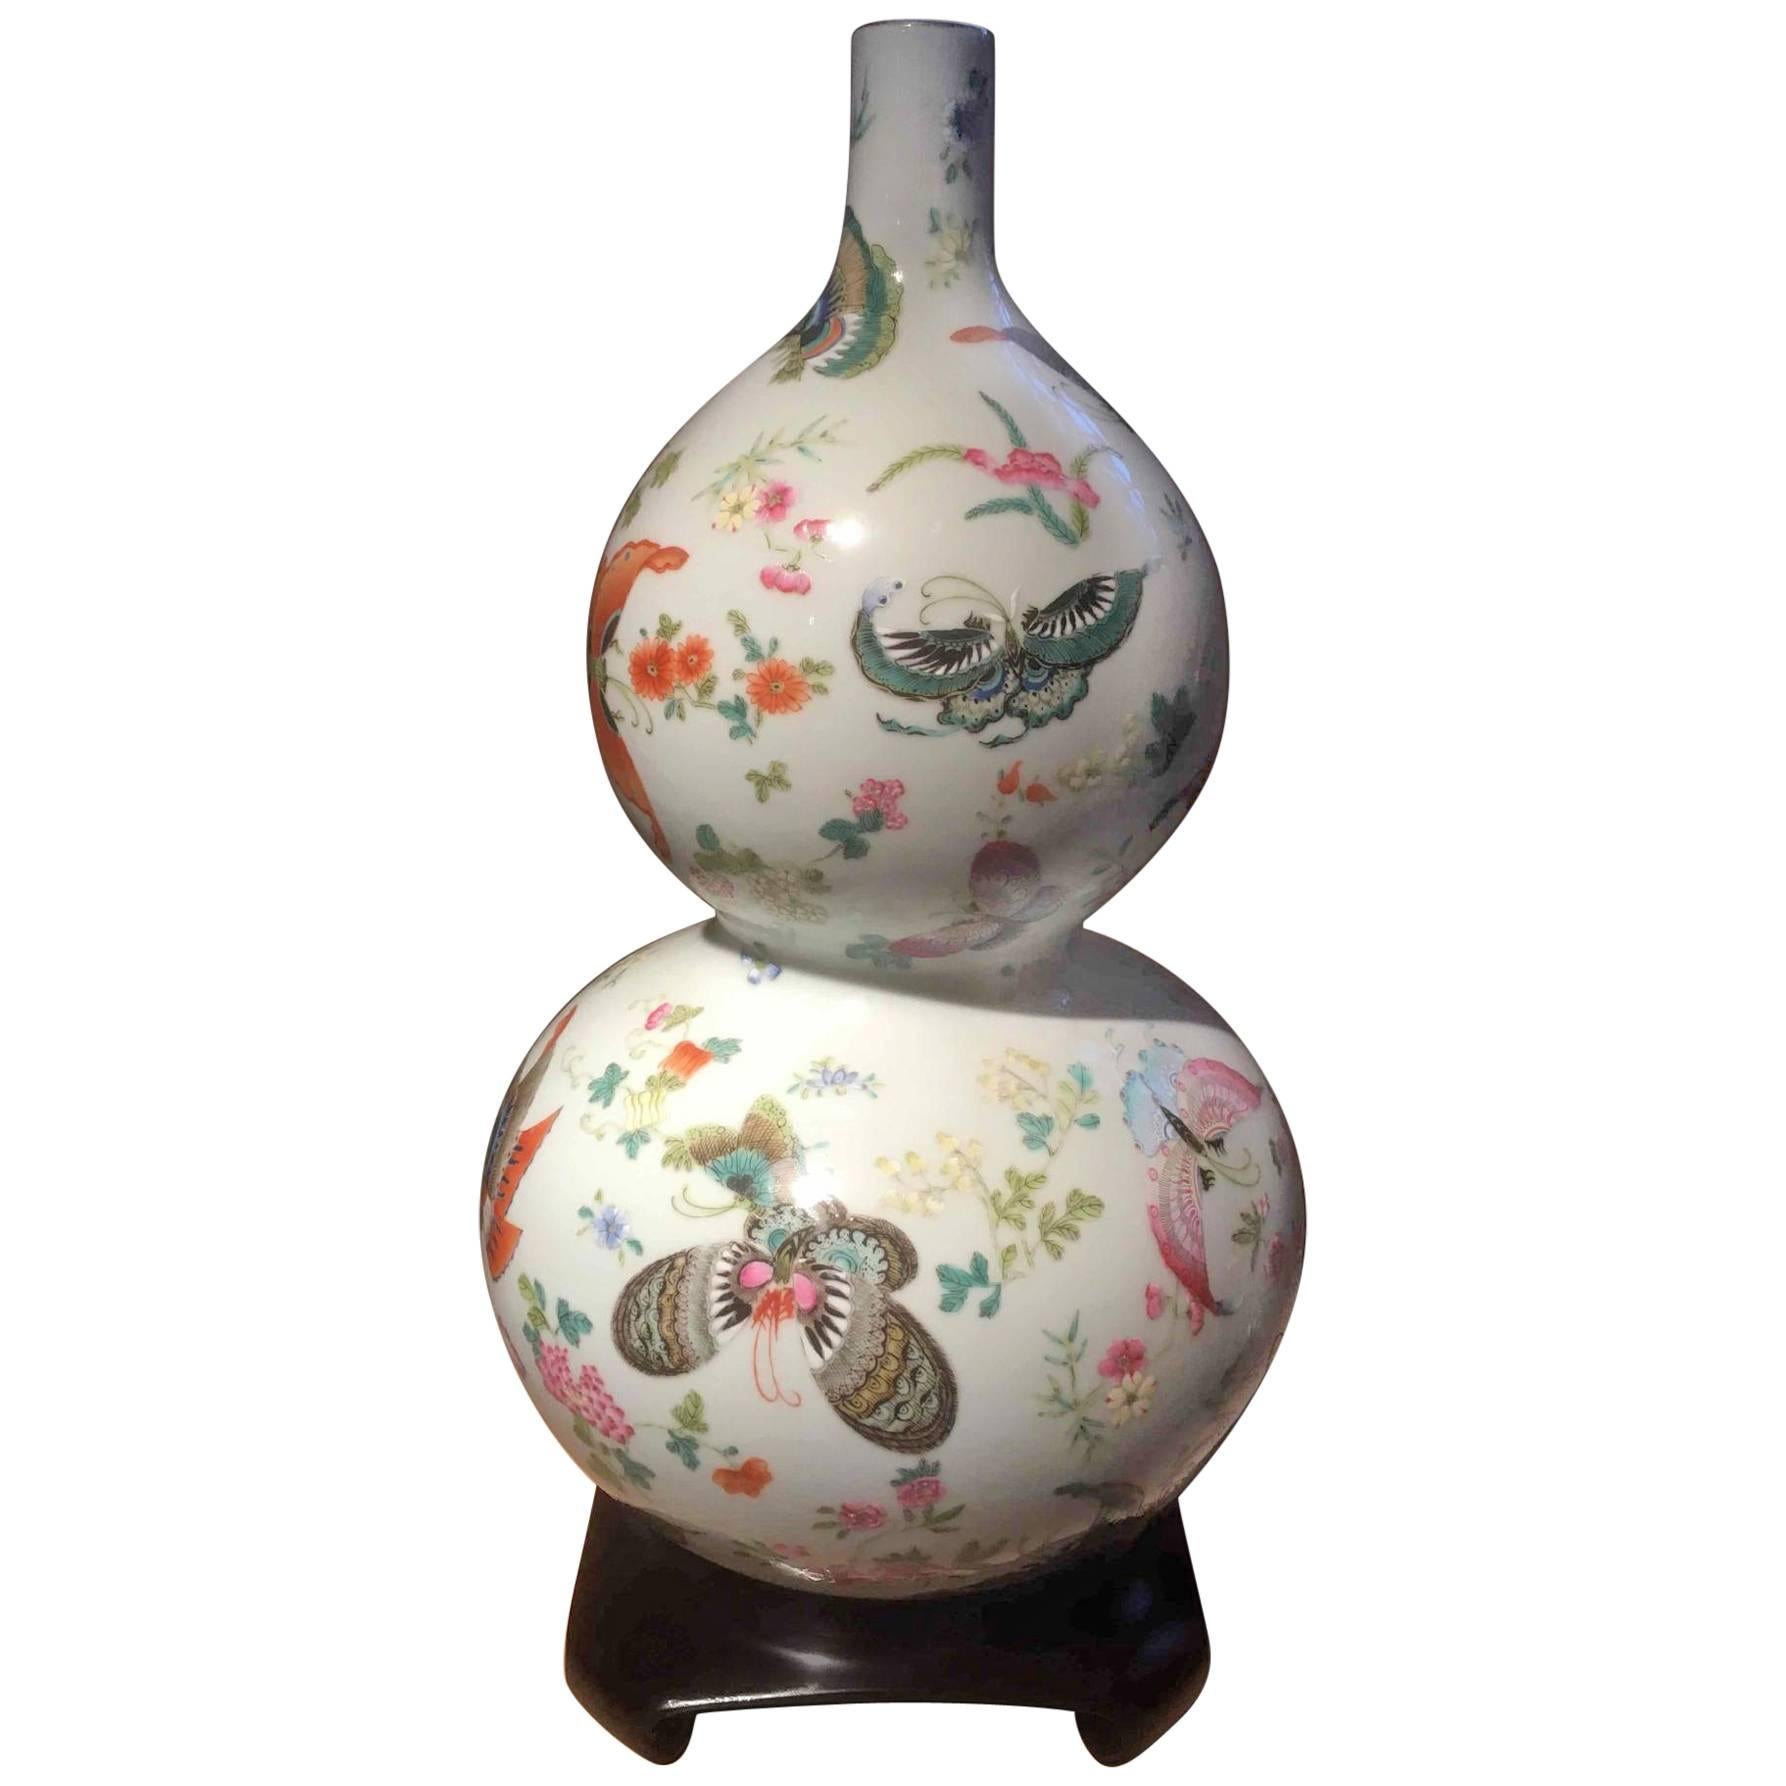 Butterfly Vase Mark on Bottom China Republic Period